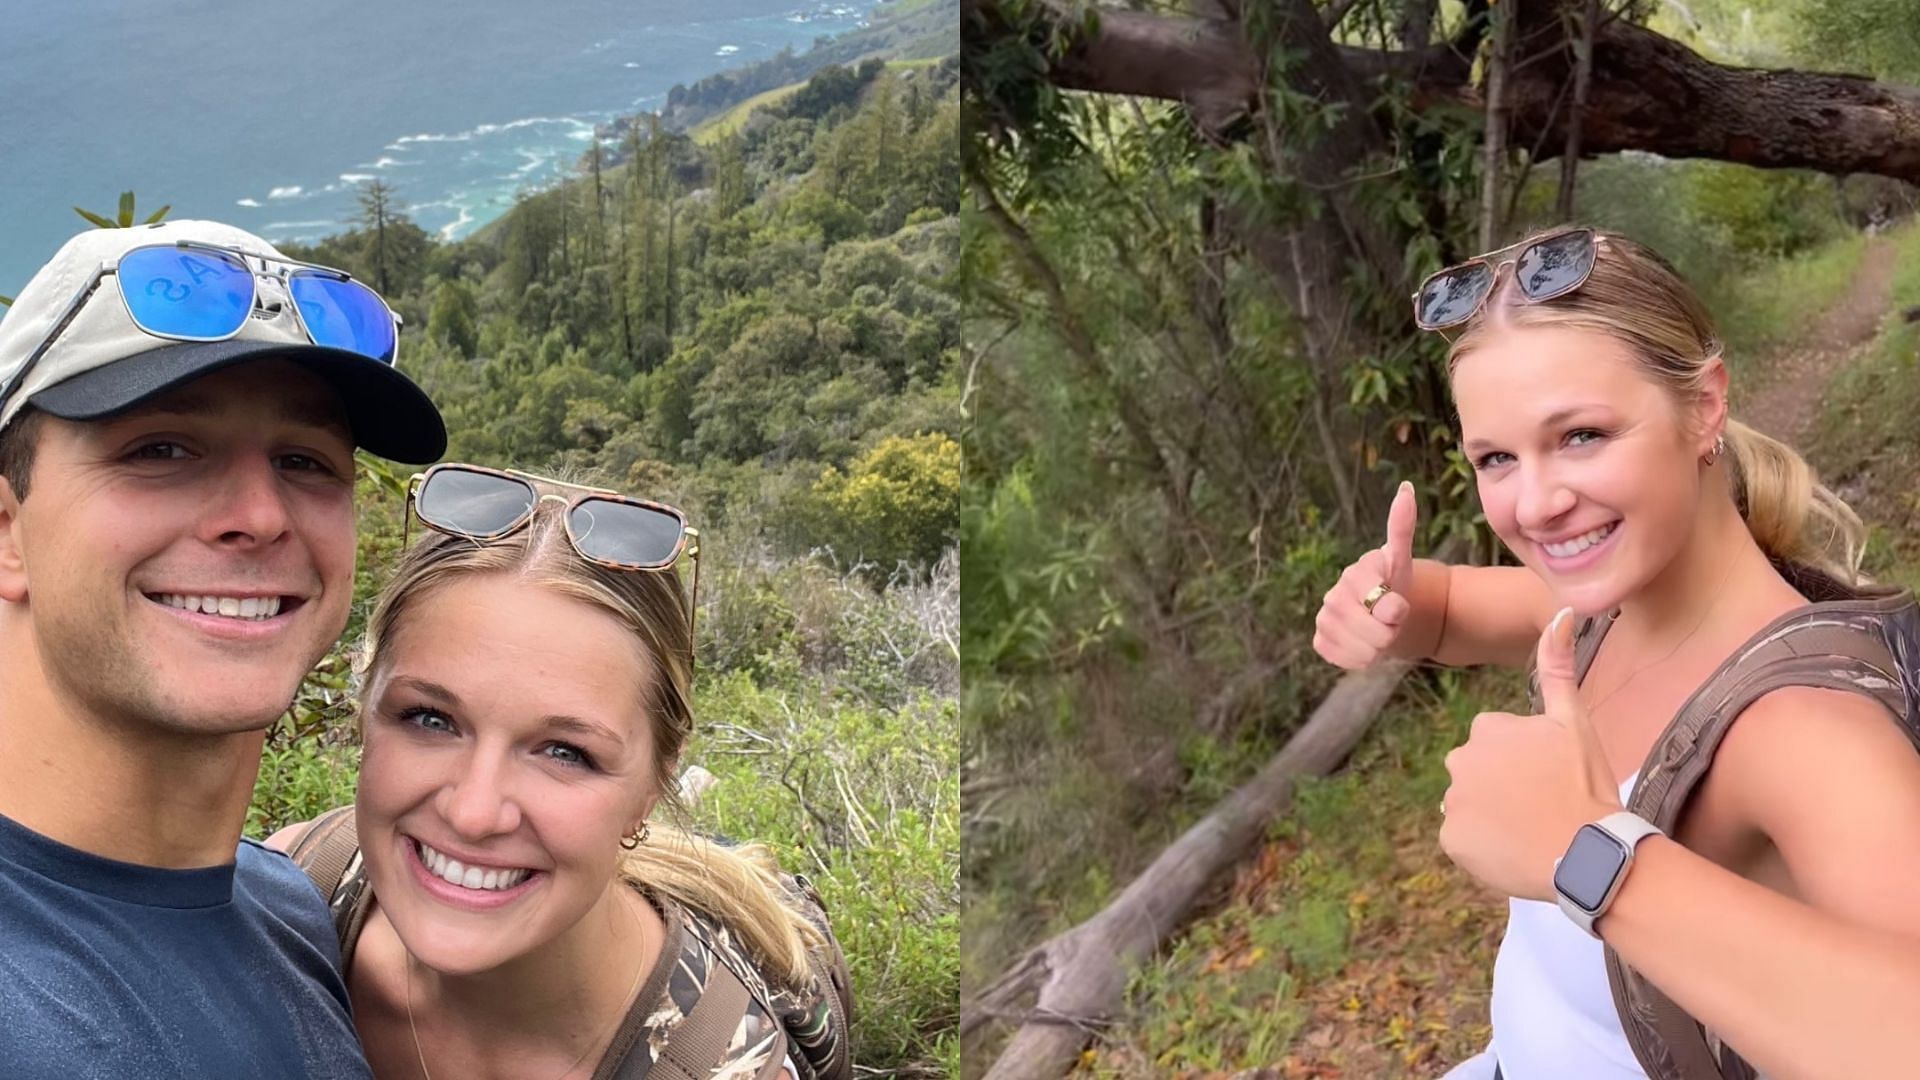 Brock Purdy went on vacation to Big Sur, California with his wife, Jenna.